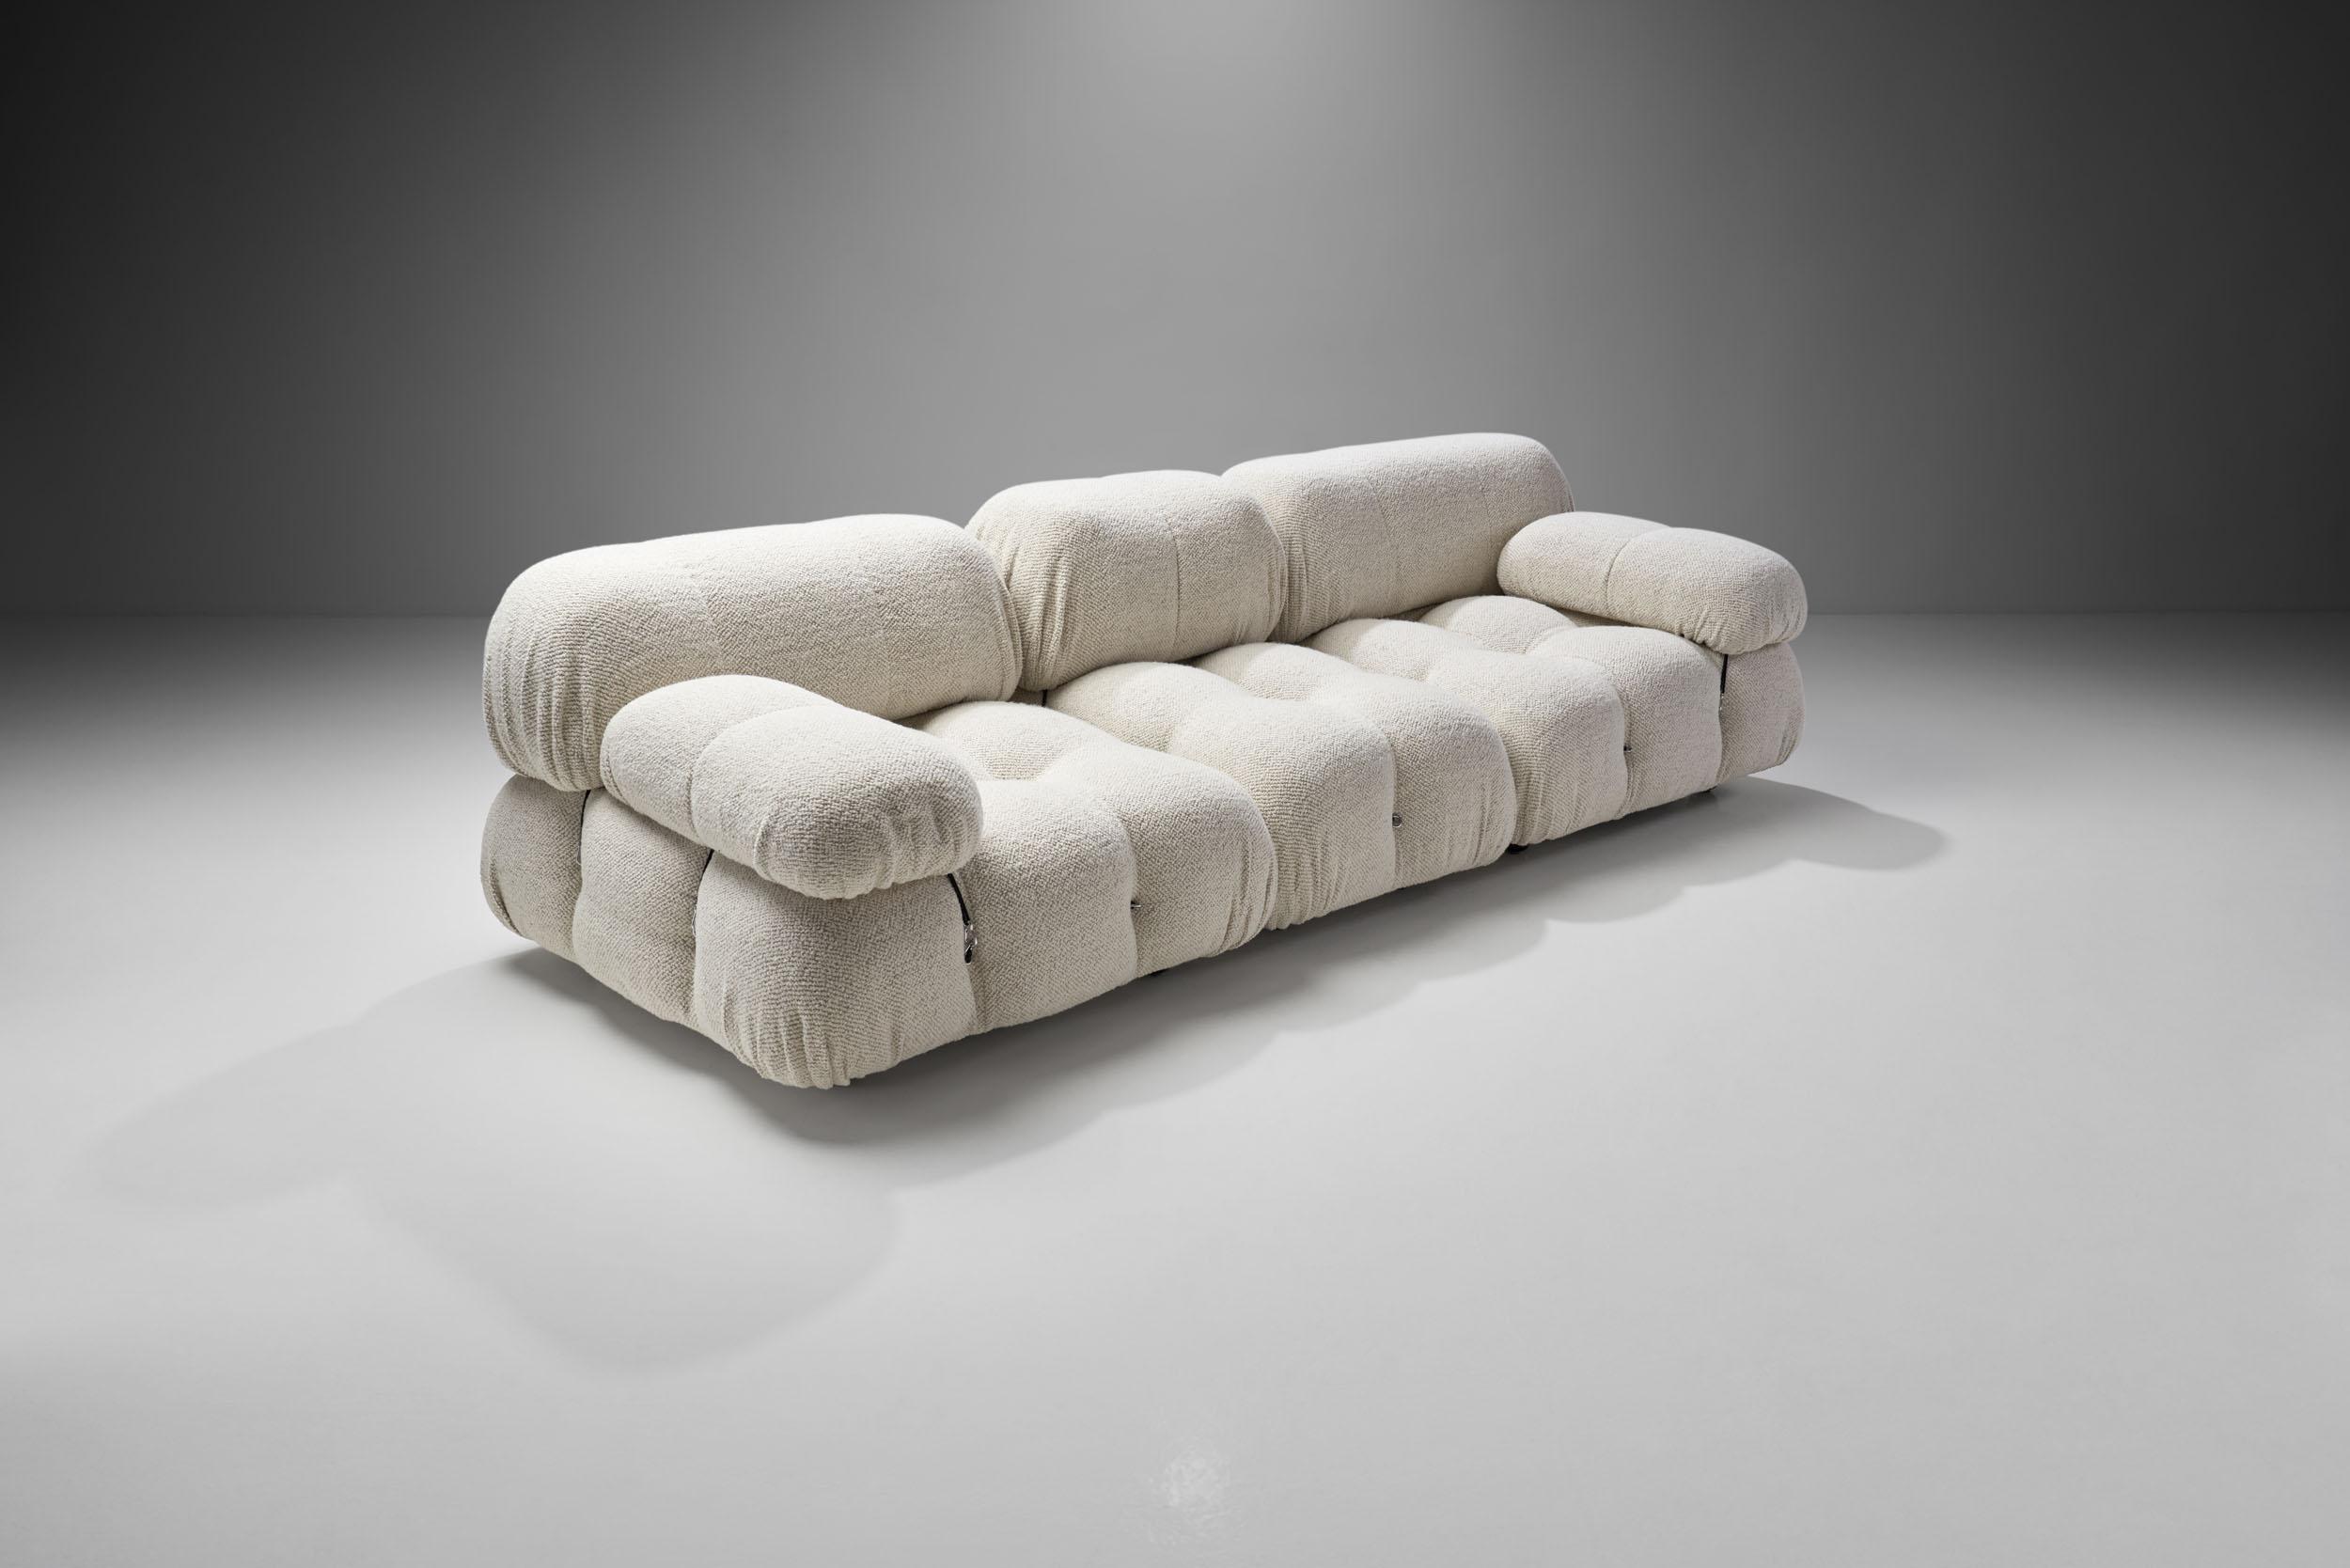 The “Camaleonda” (Italian word play combining the words ‘chameleon’ and ‘wave’) sofa is Mario Bellini’s contemporary classic. The playful, modular design offers endless options for the user, which also inspired the model’s name. Camaleonda has